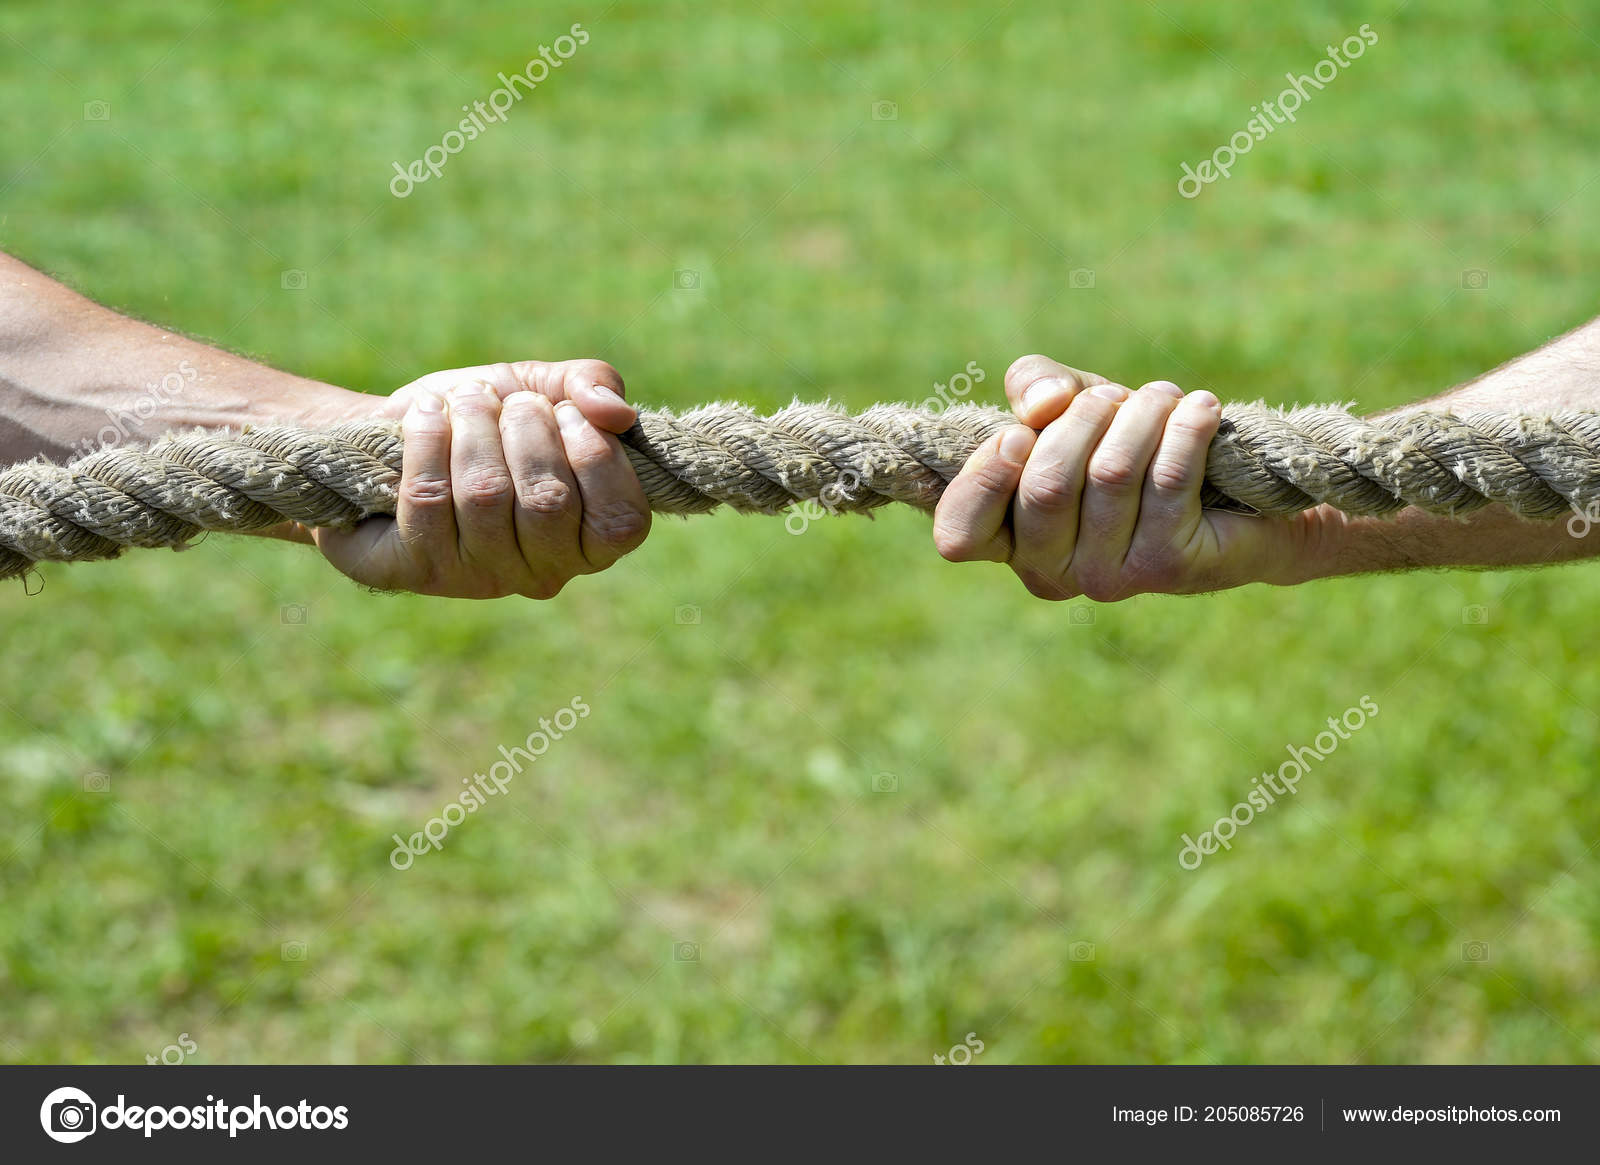 Two Men's Hands Pull Rope Each His Own Direction Concept